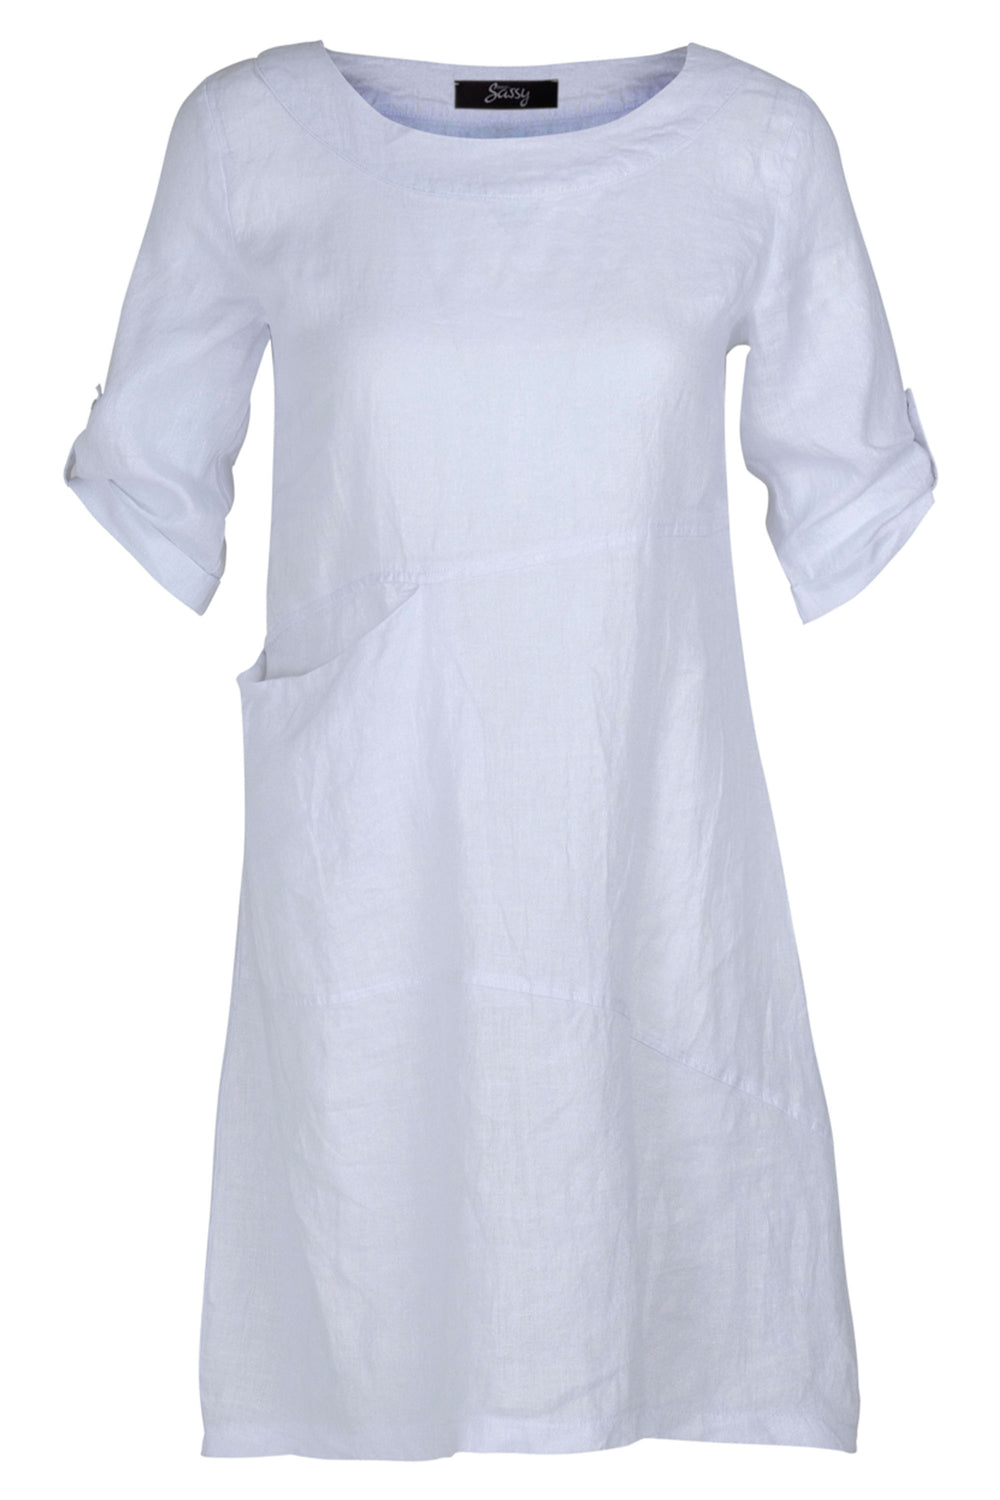 EverSassy Spring 2023 women's casual linen shift t-shirt dress with pocket  -White front